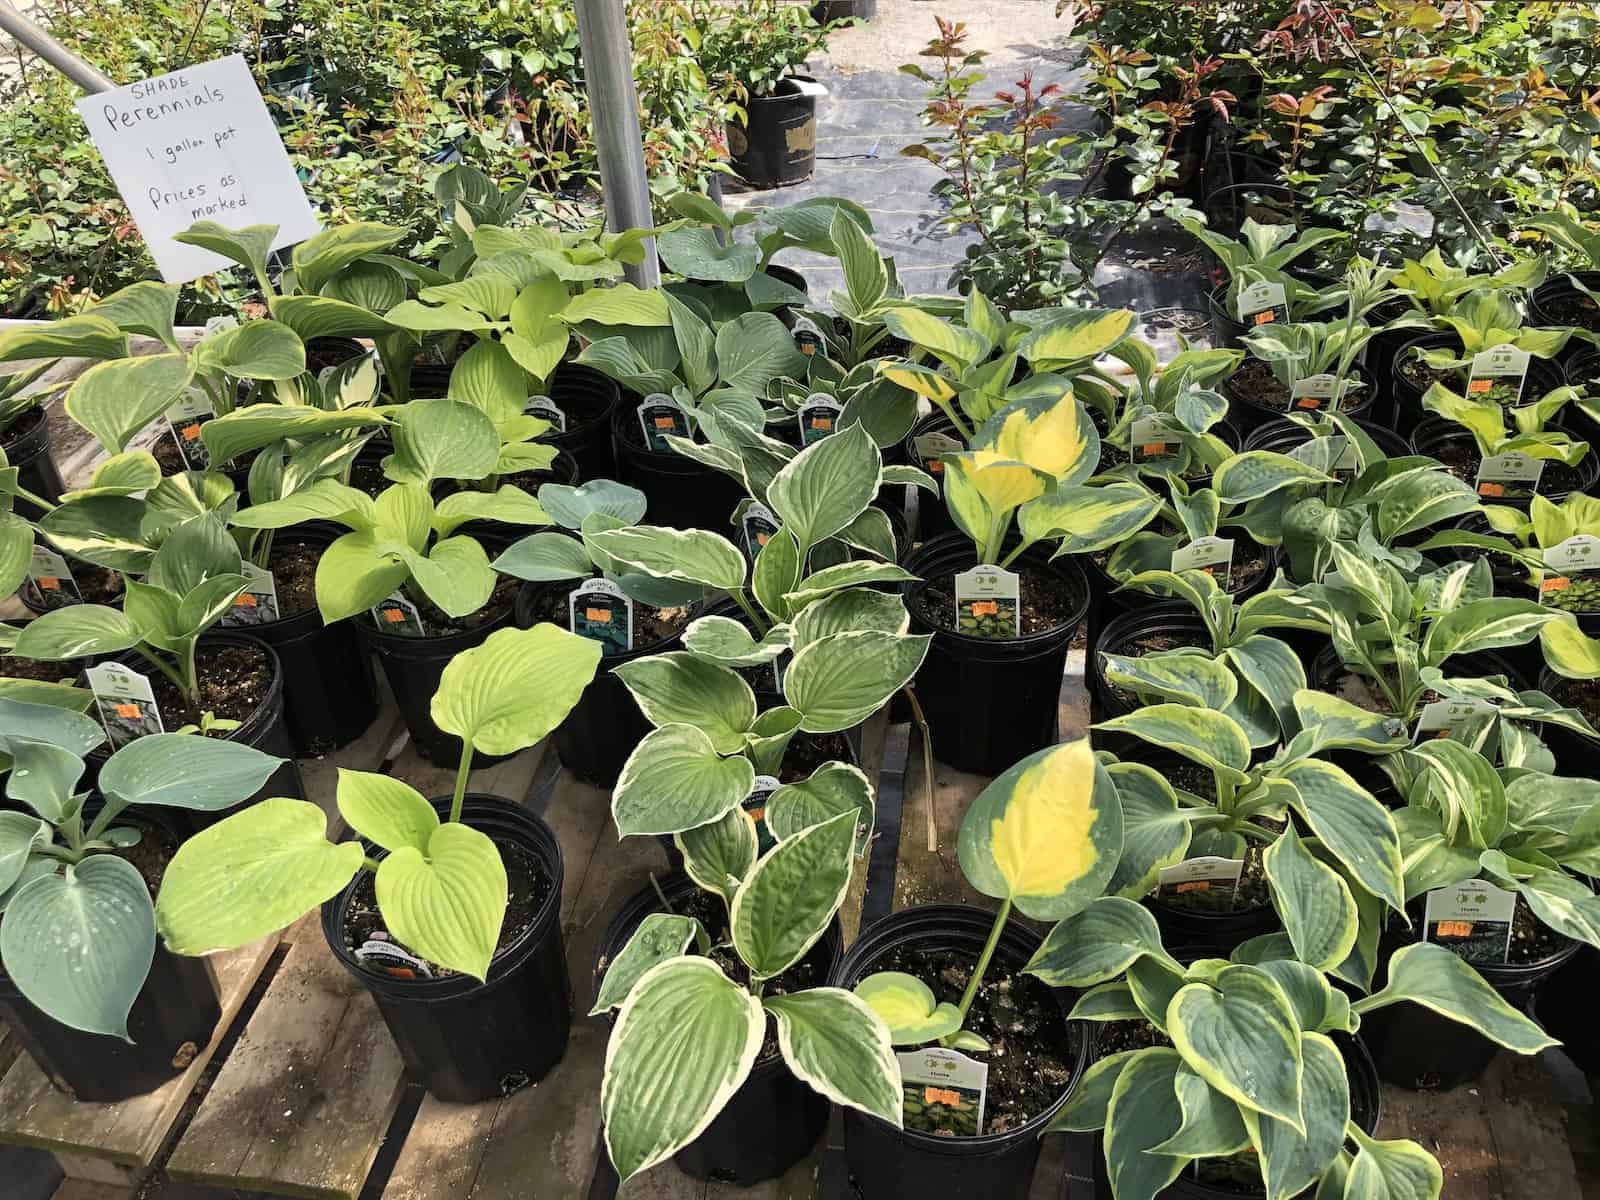 Hostas of different varieties for sale at the plant nursery